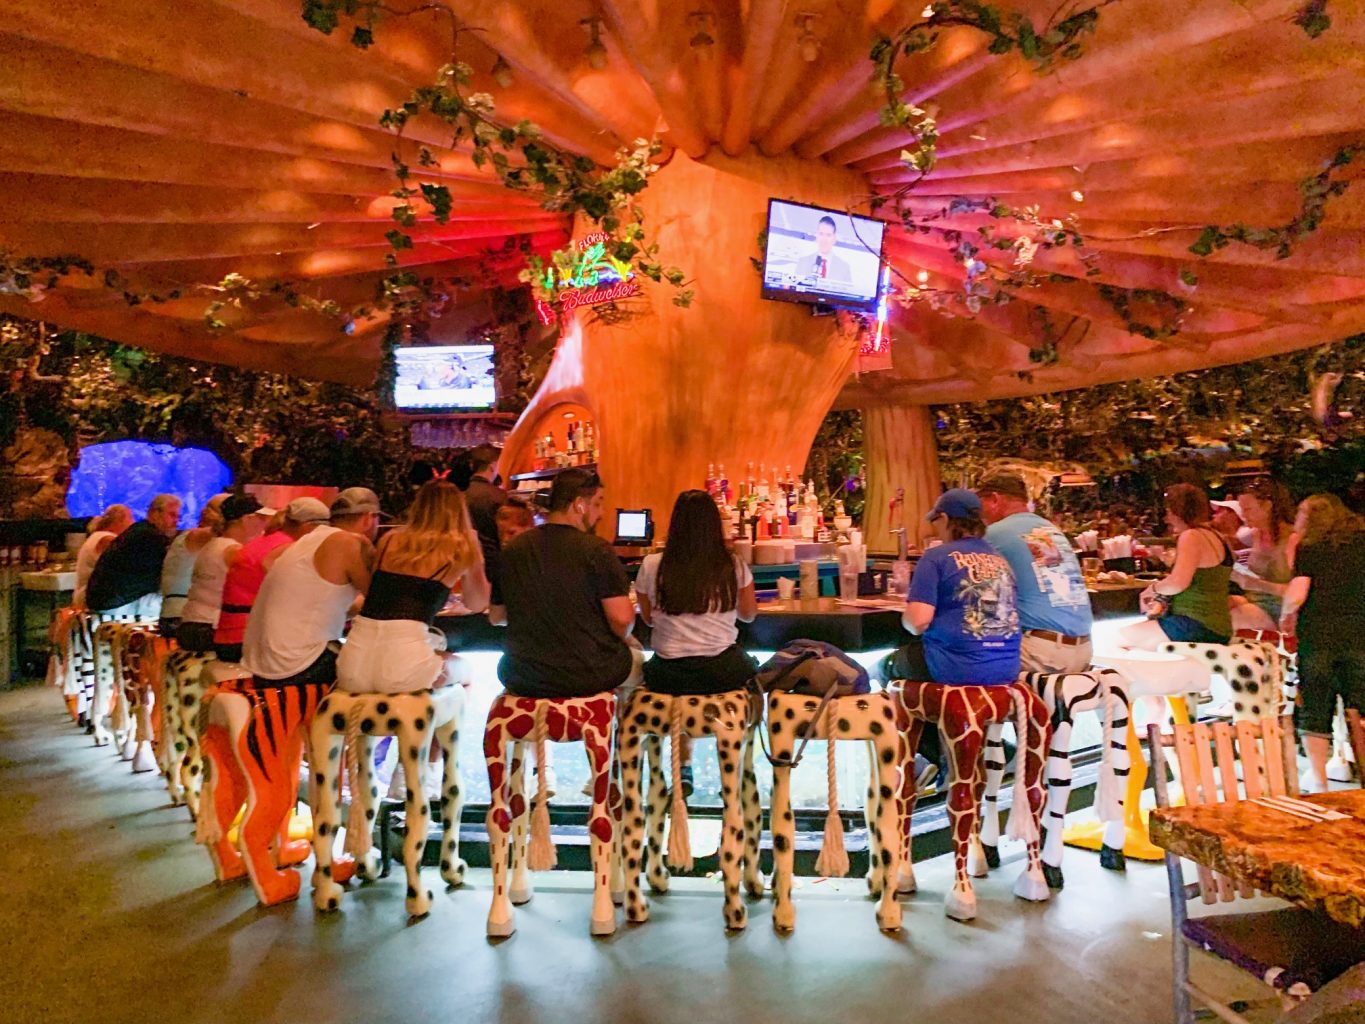 In this photo, the bar area is lit with red light and people sitting on chairs modeled after the lower halves of animals, giving it a very zoo-like vibe. This is the rainforest cafe, a chain restaurant you don't have to eat at because it isn't one of the best Animal Kingdom restaurants. 